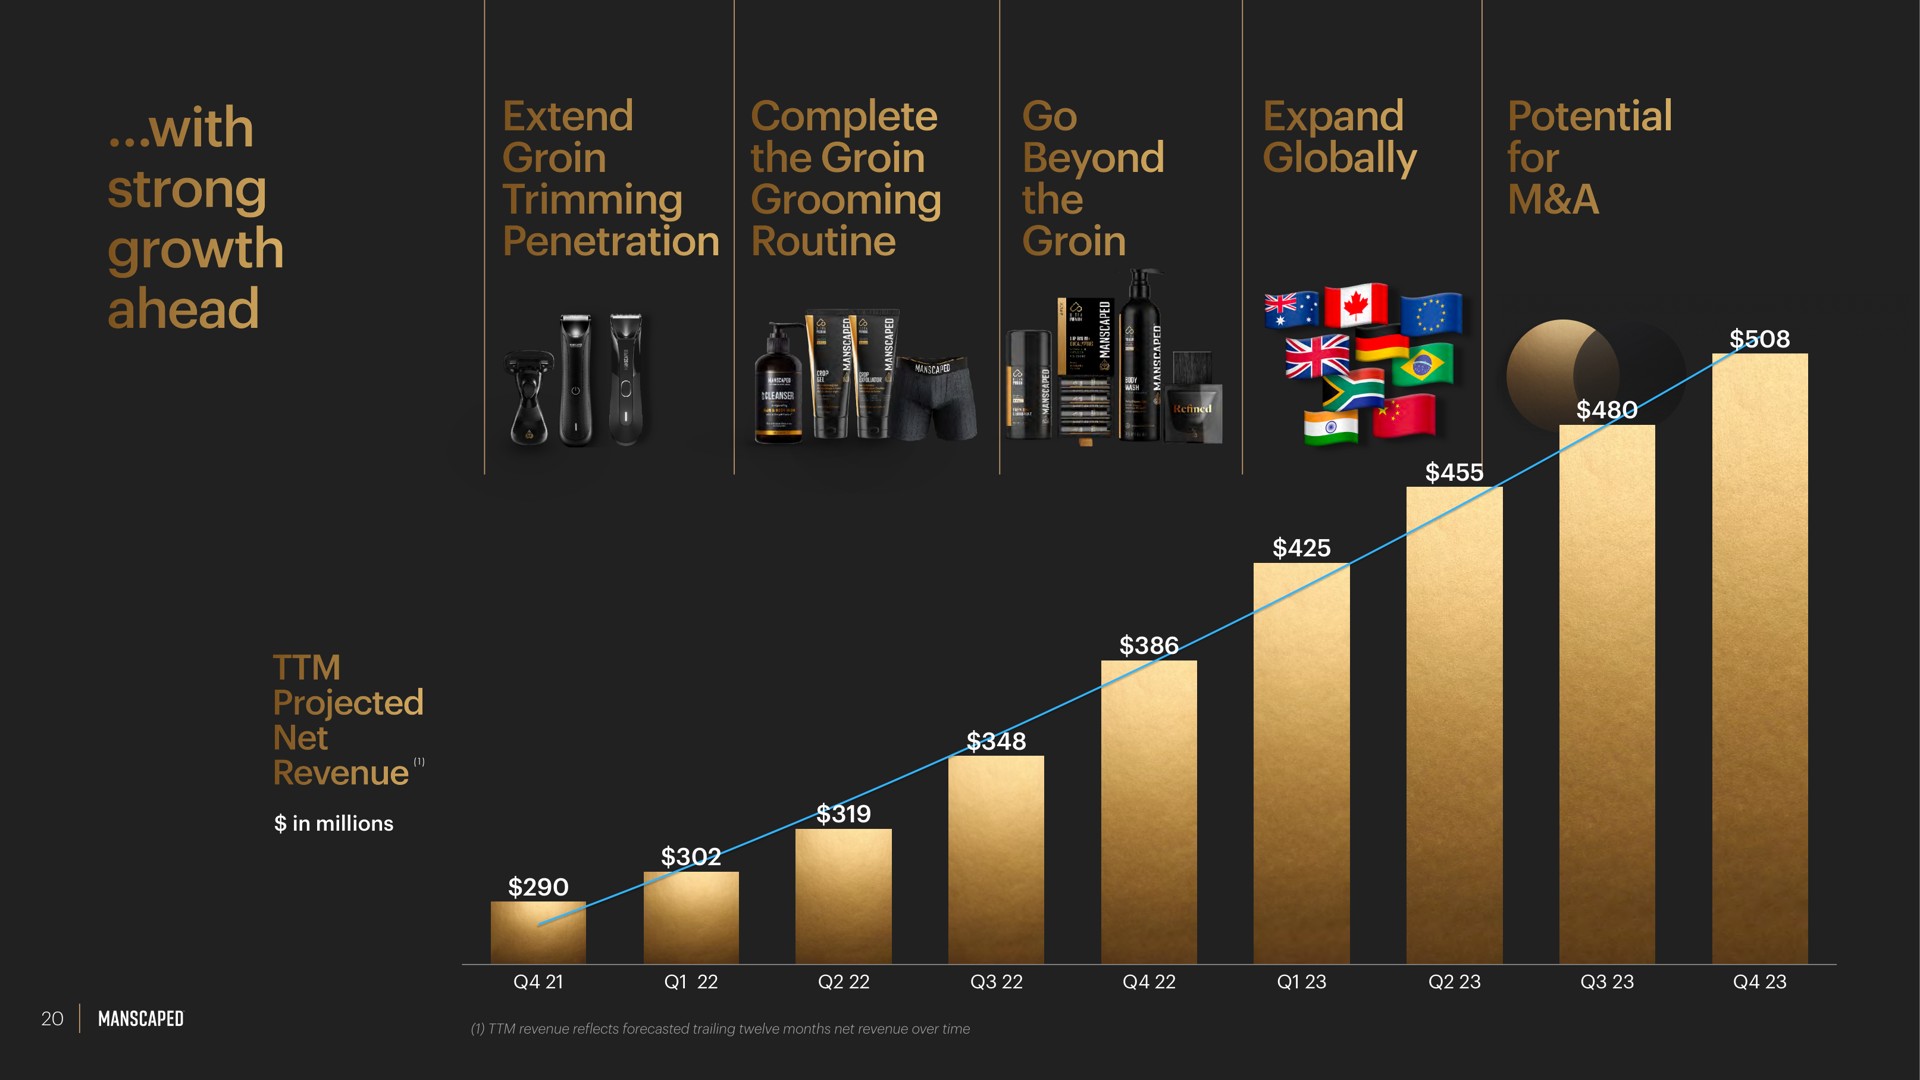 with strong growth ahead extend groin trimming penetration complete the groin grooming routine go beyond the groin expand globally potential for a projected net revenue row men he are or on i tao | Manscaped